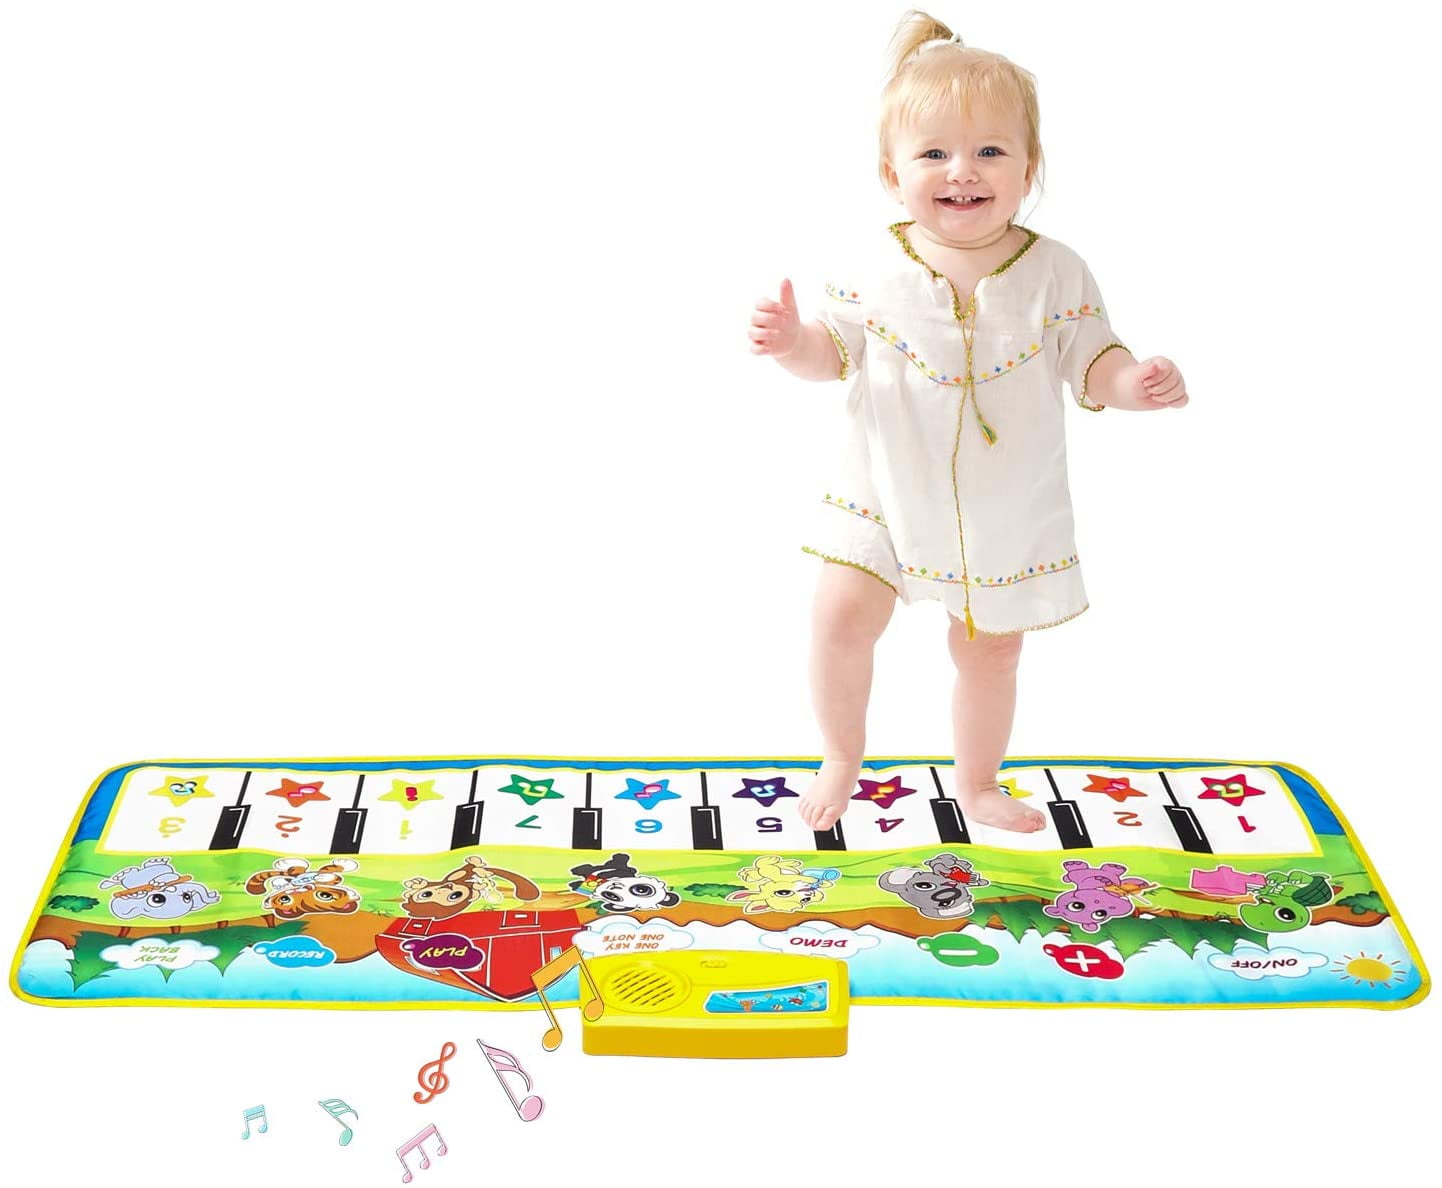 Baby Musical Carpet Piano Keyboard Kids Play Music Mat Educational Touch Toy 